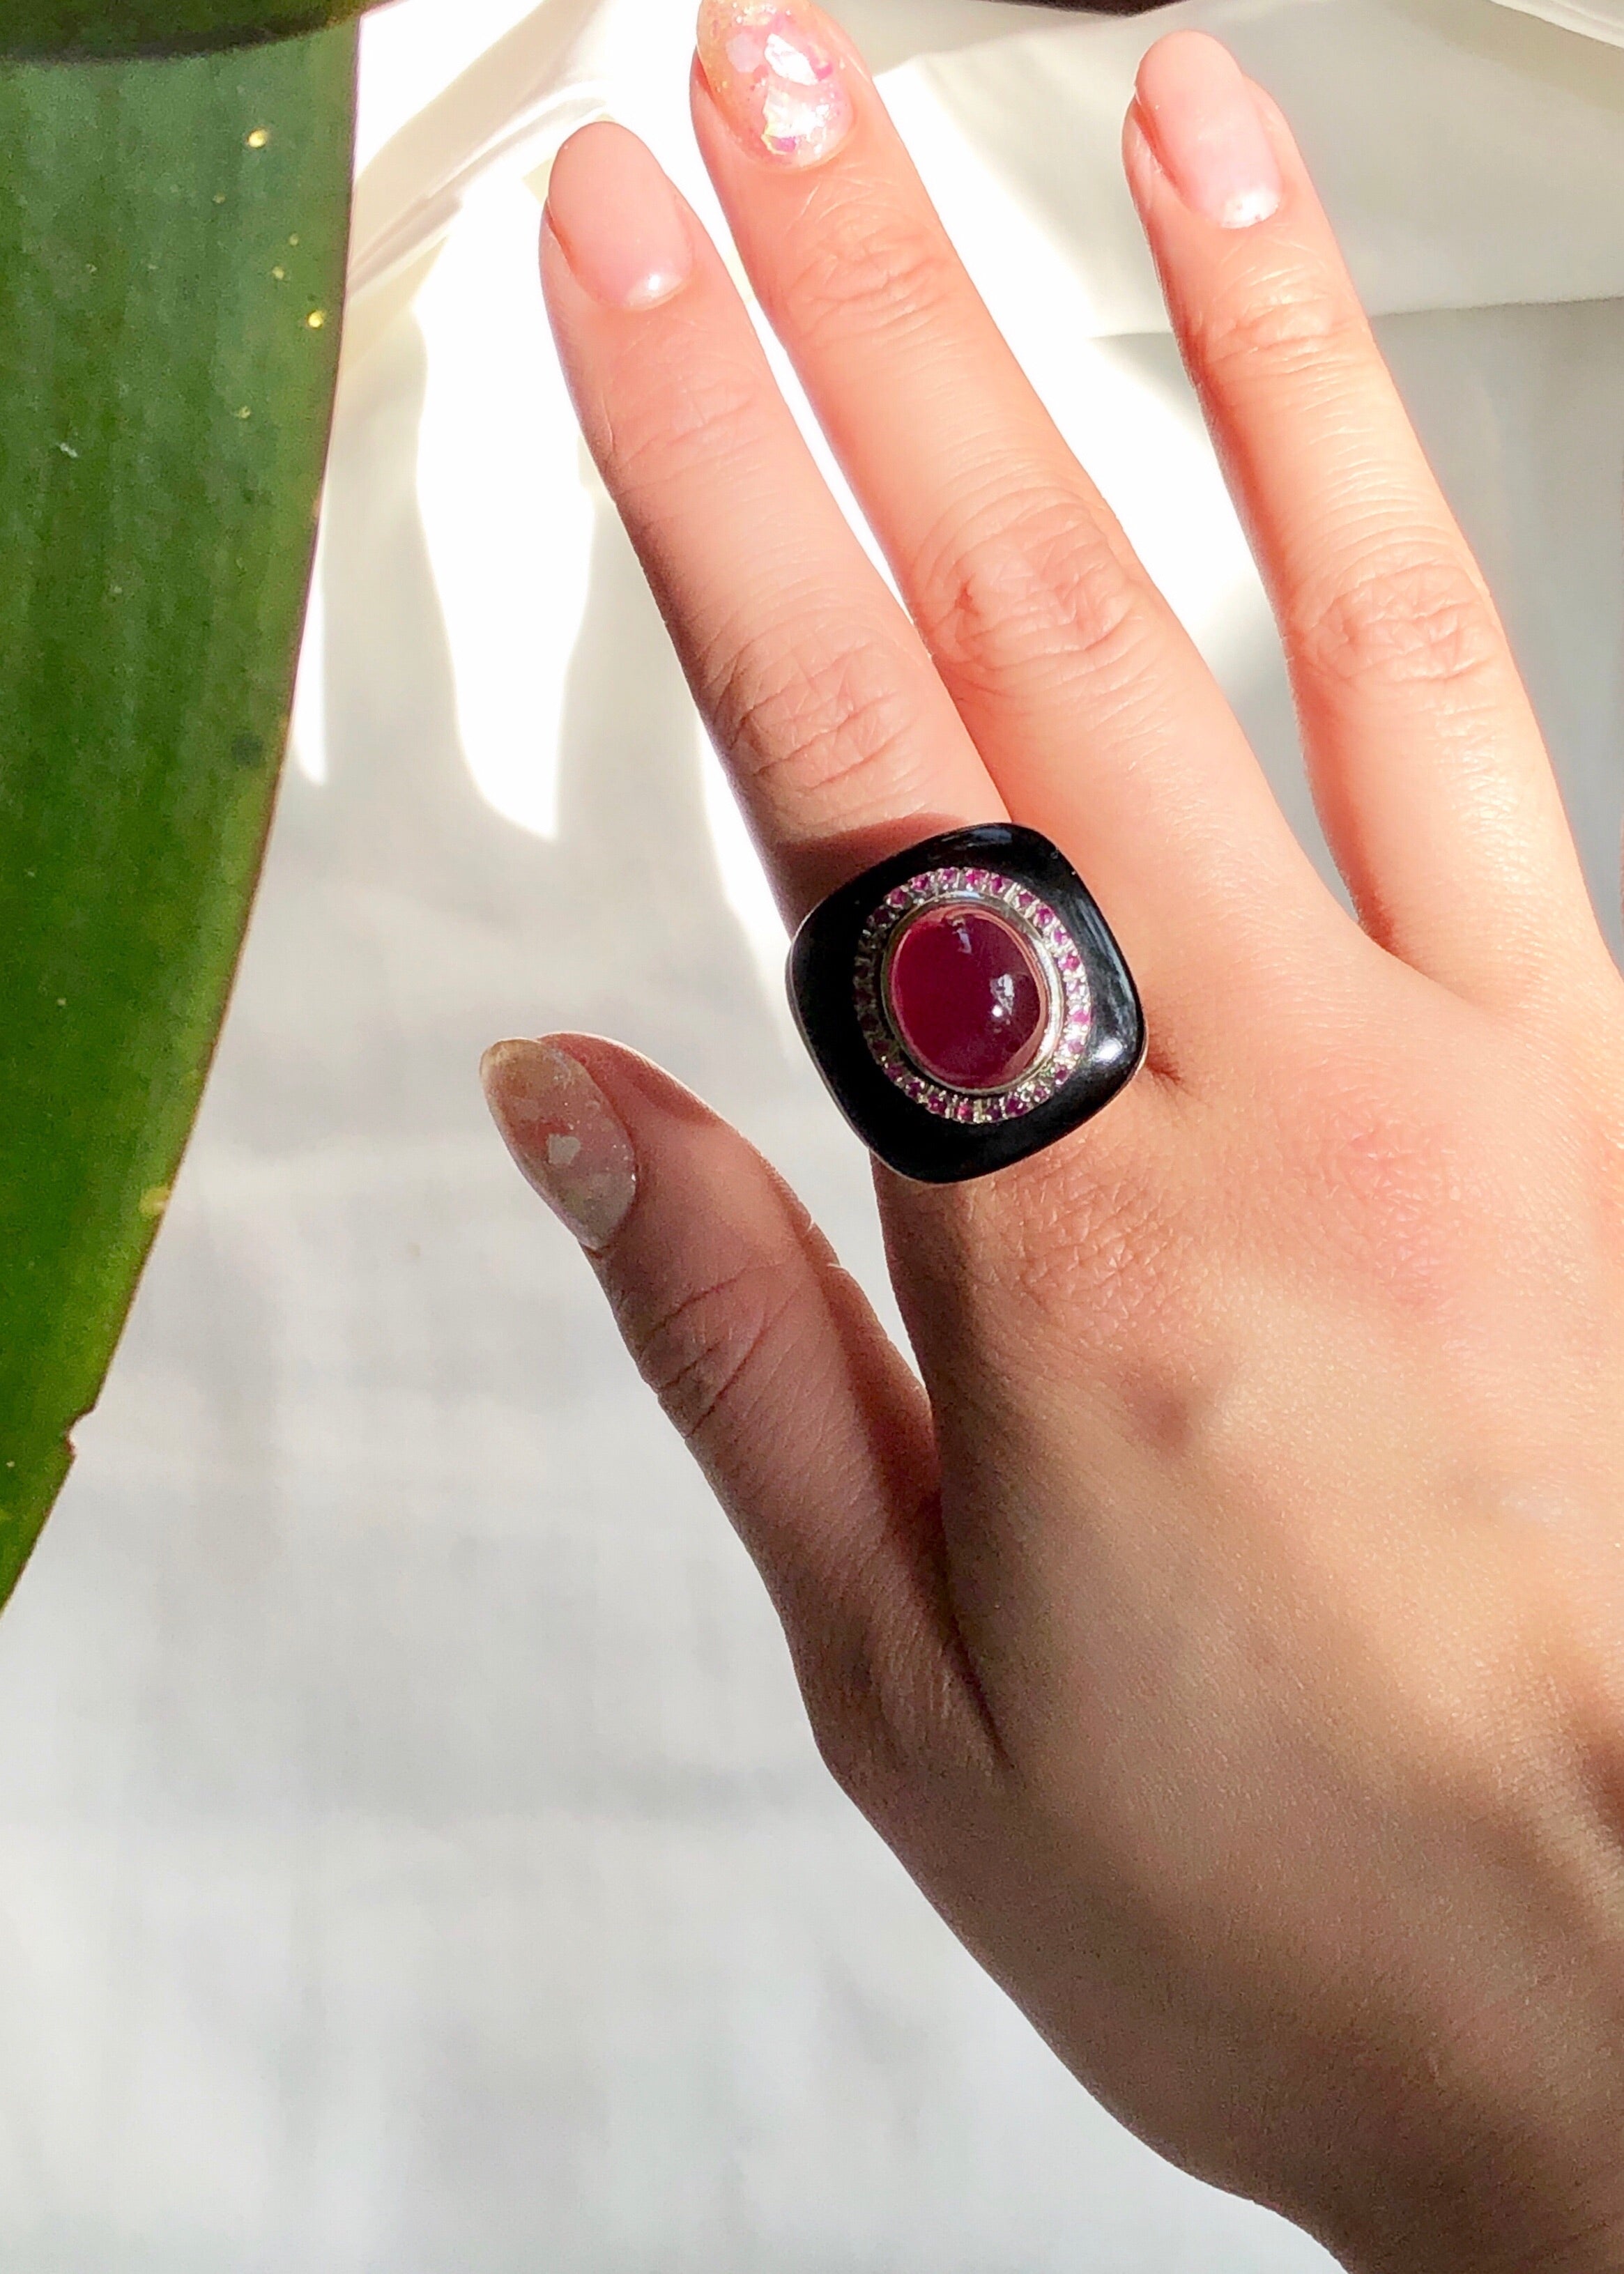 Old Burmese Ruby Cabochon Cocktail Ring